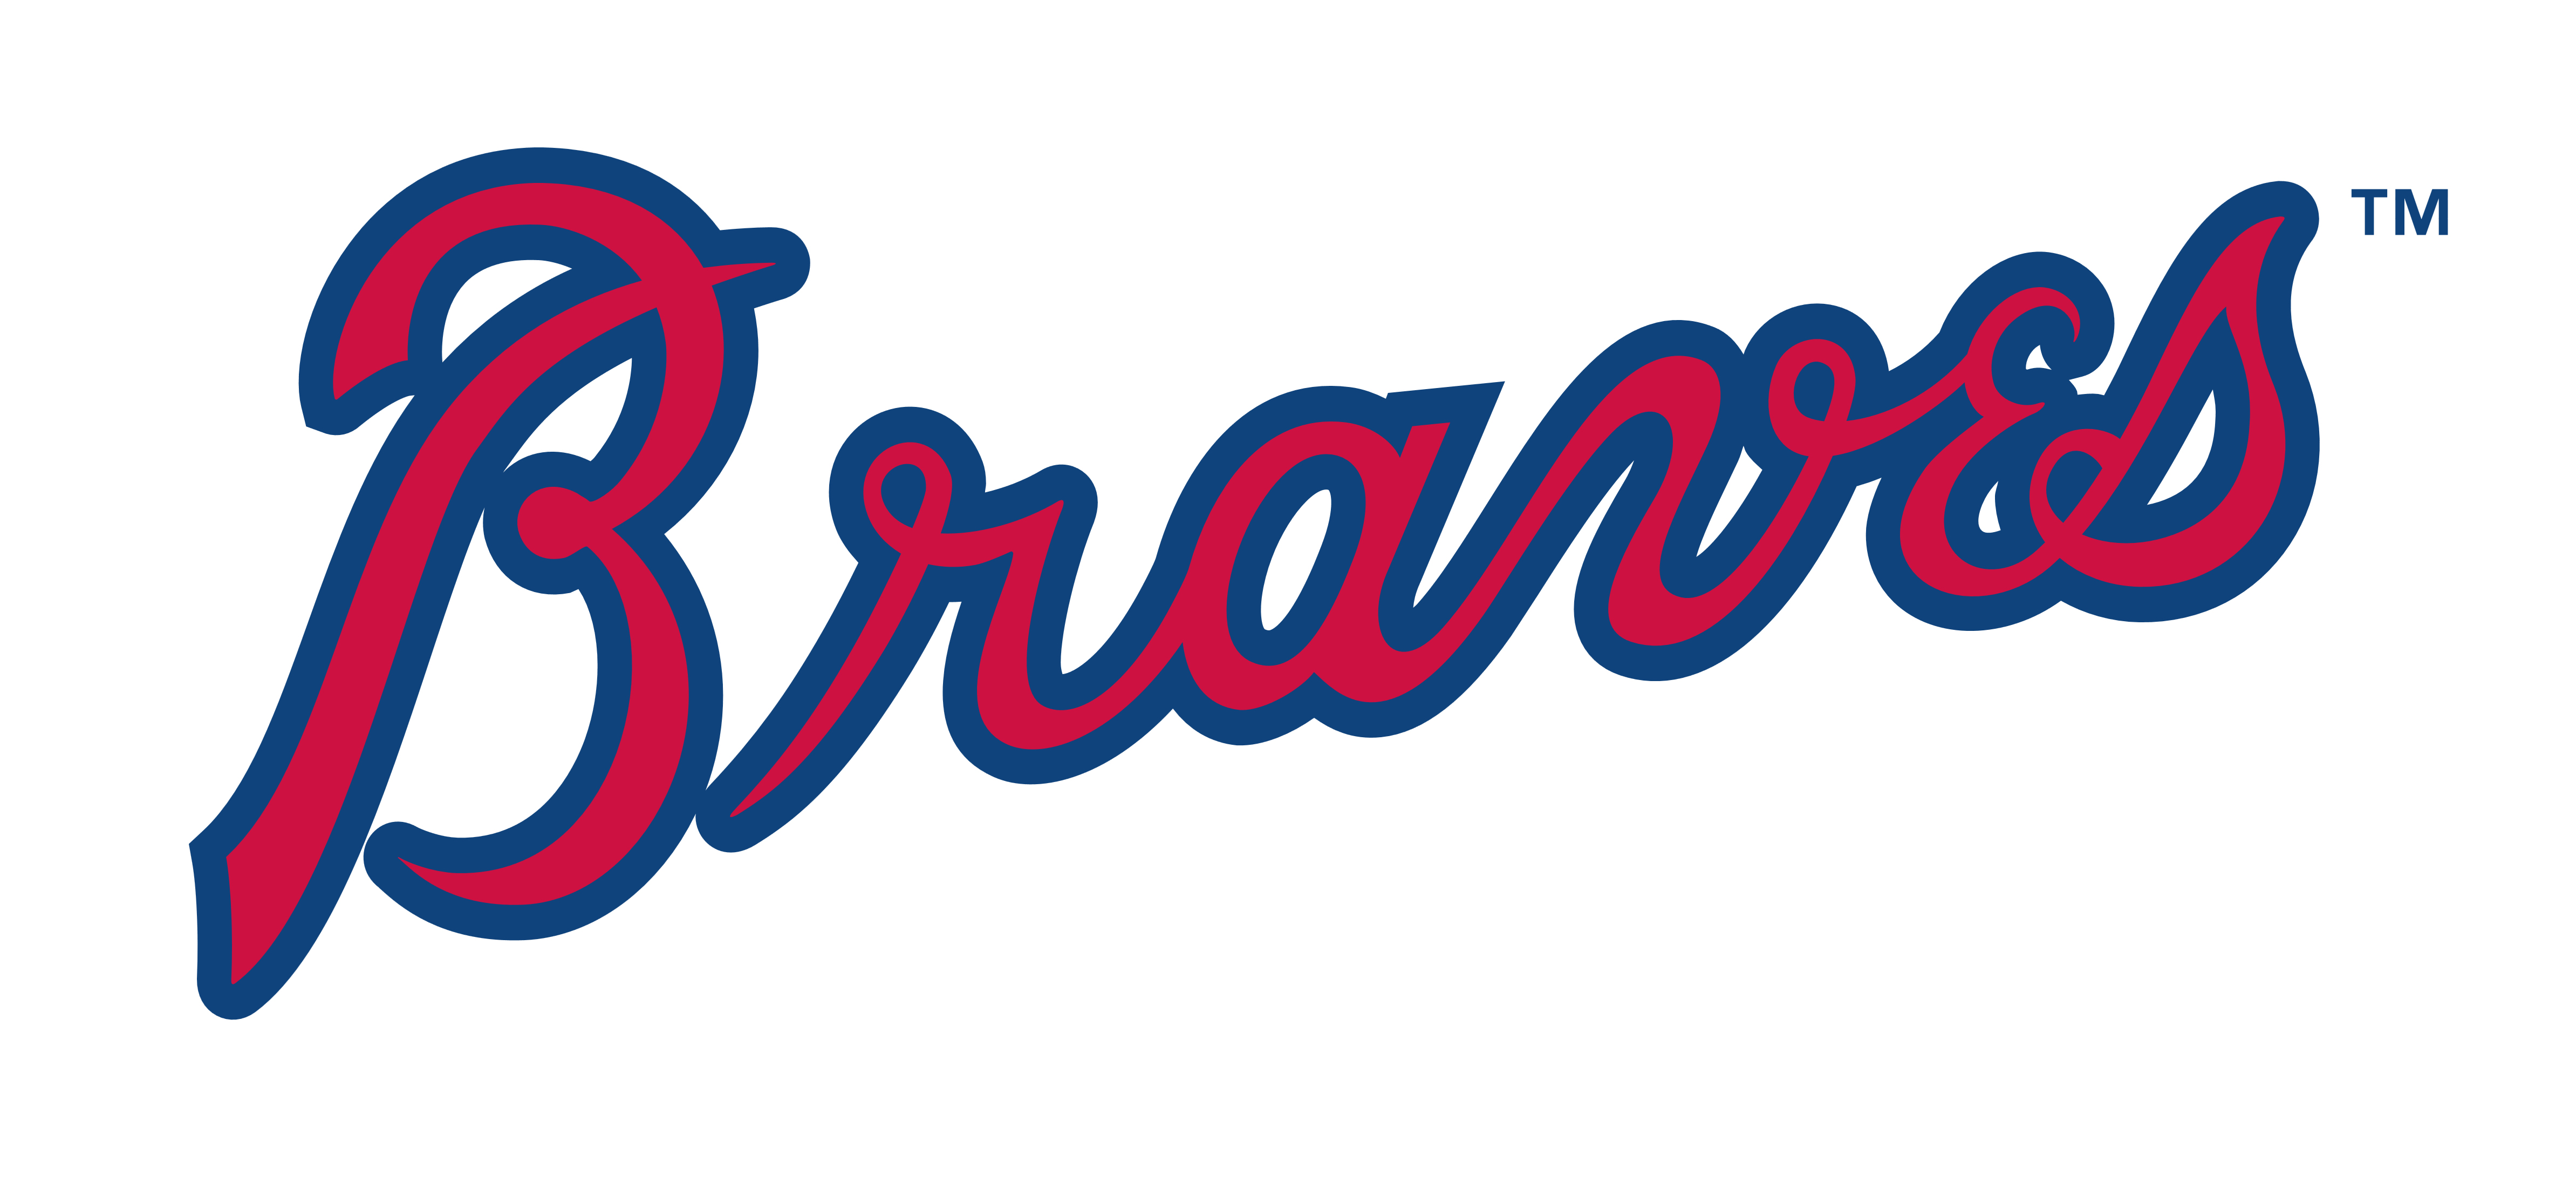 Collection of Atlanta braves clipart.